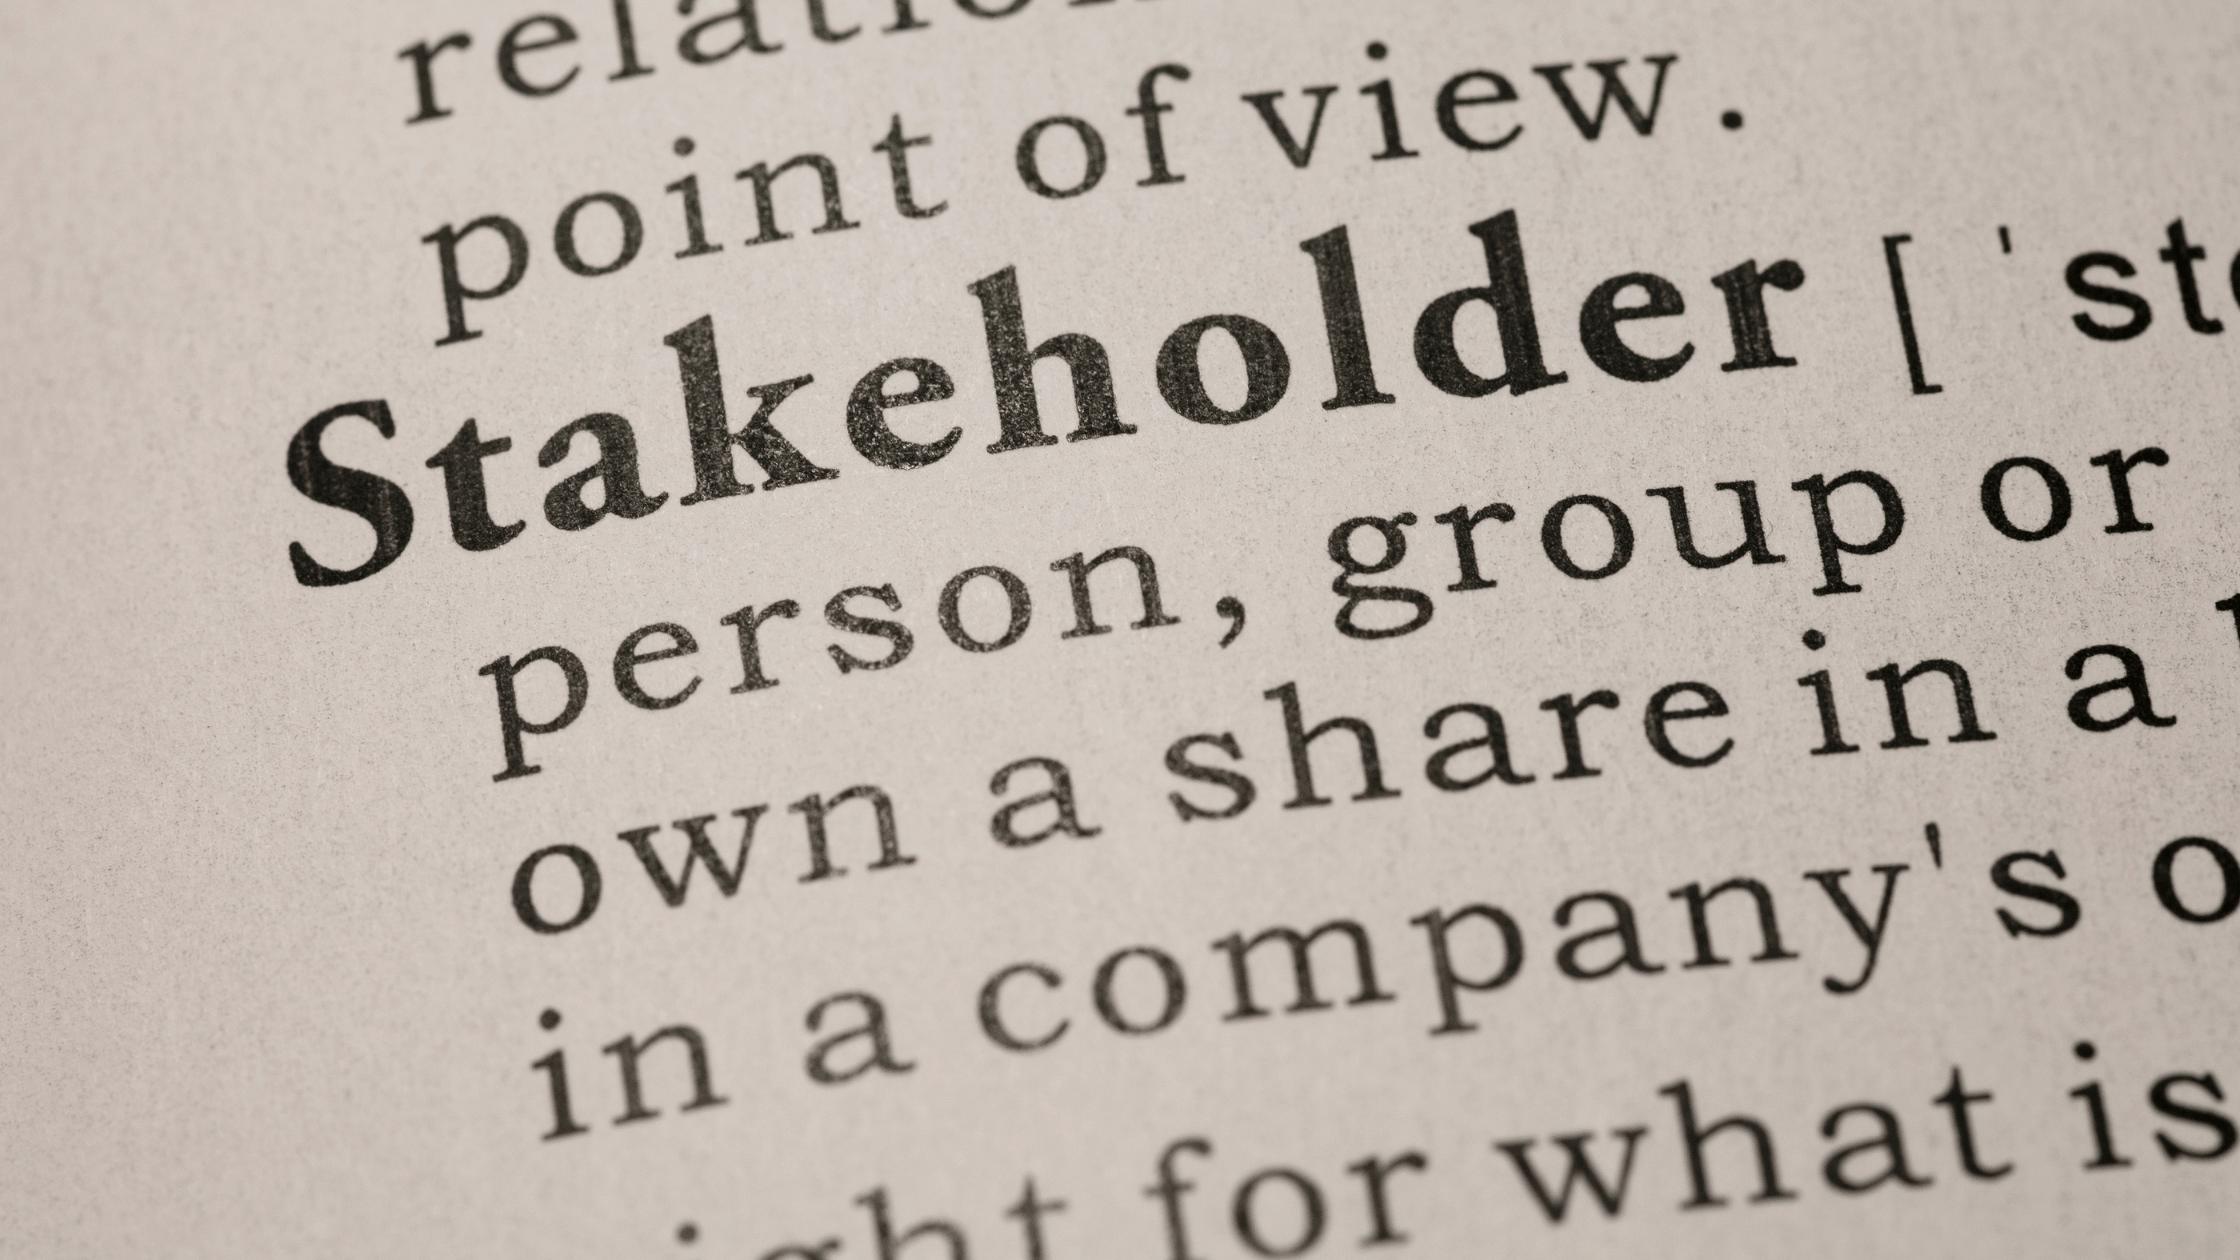 Stakeholder word definition